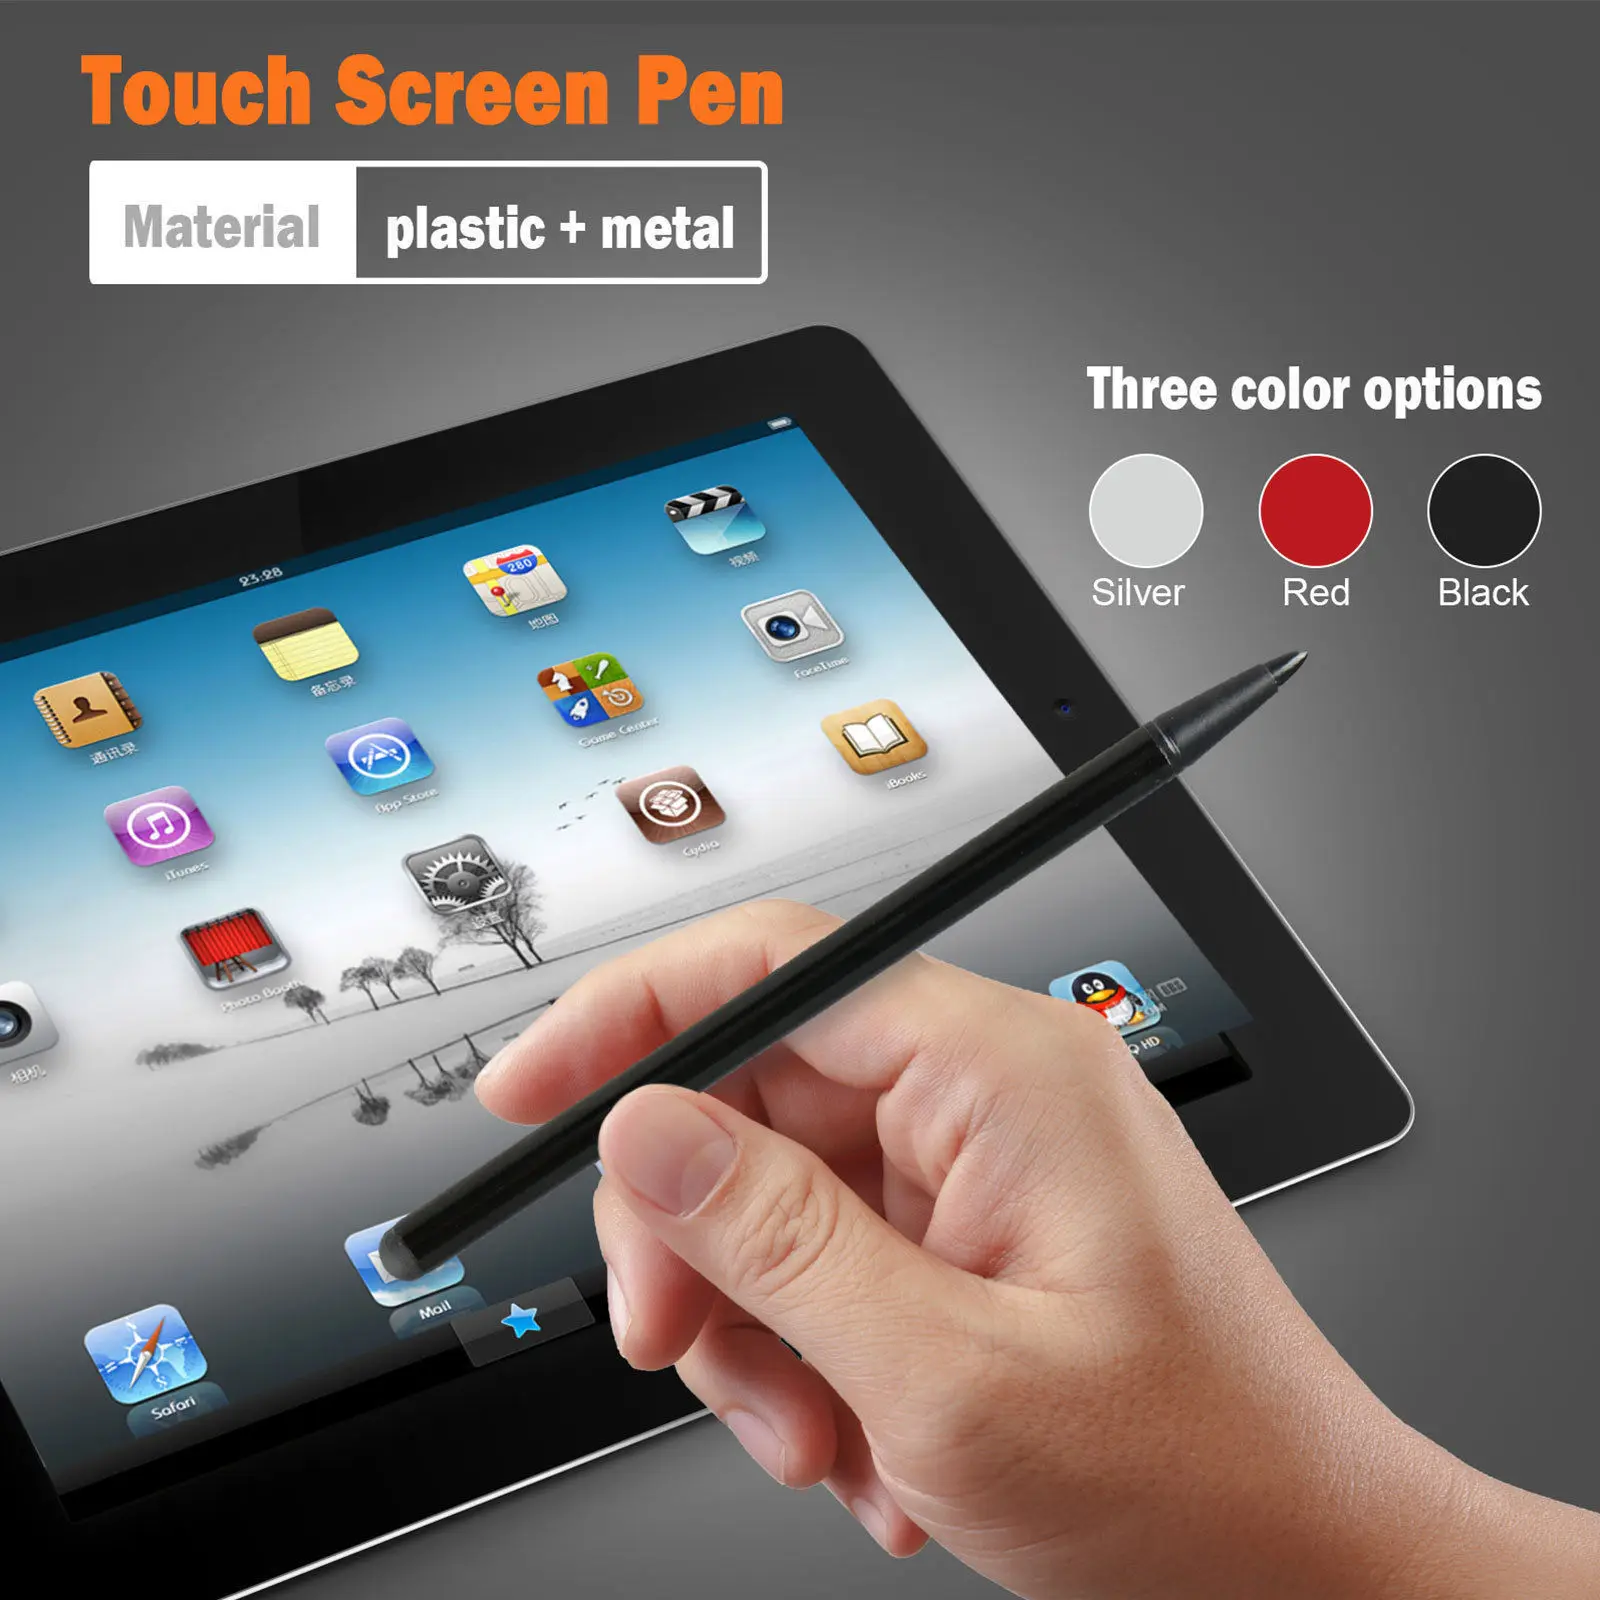 Capacitive &Resistance Pen Stylus Touch Screen Drawing Pen For Phone/iPad/Tablet/PC Universal Stylus Pen without Bluetooth